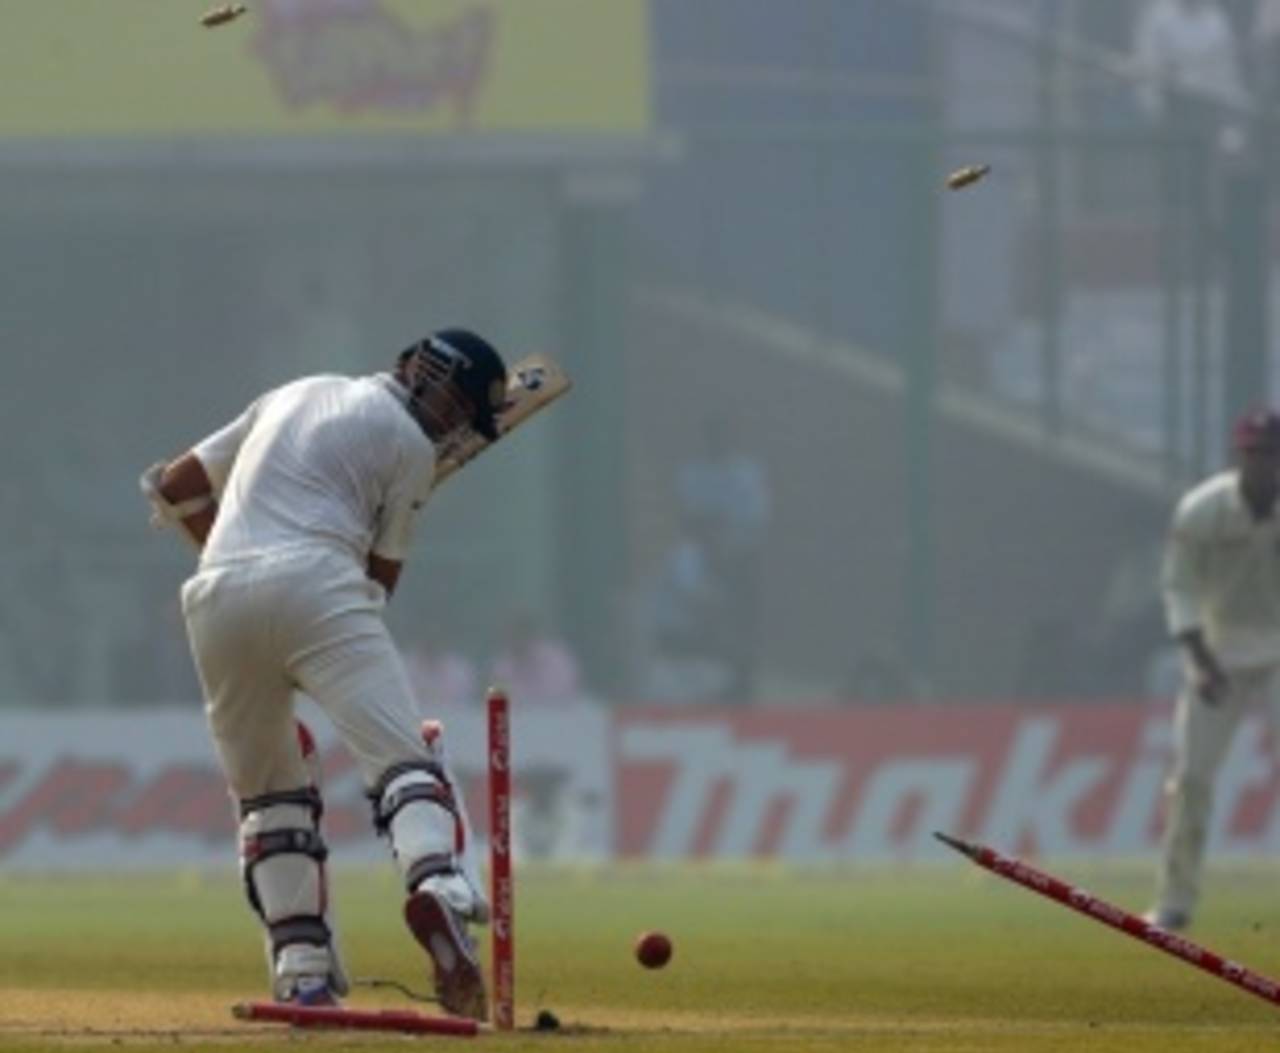 Rahul Dravid was bowled by Fidel Edwards, India v West Indies, 1st Test, New Delhi, 4th day, November 9, 2011